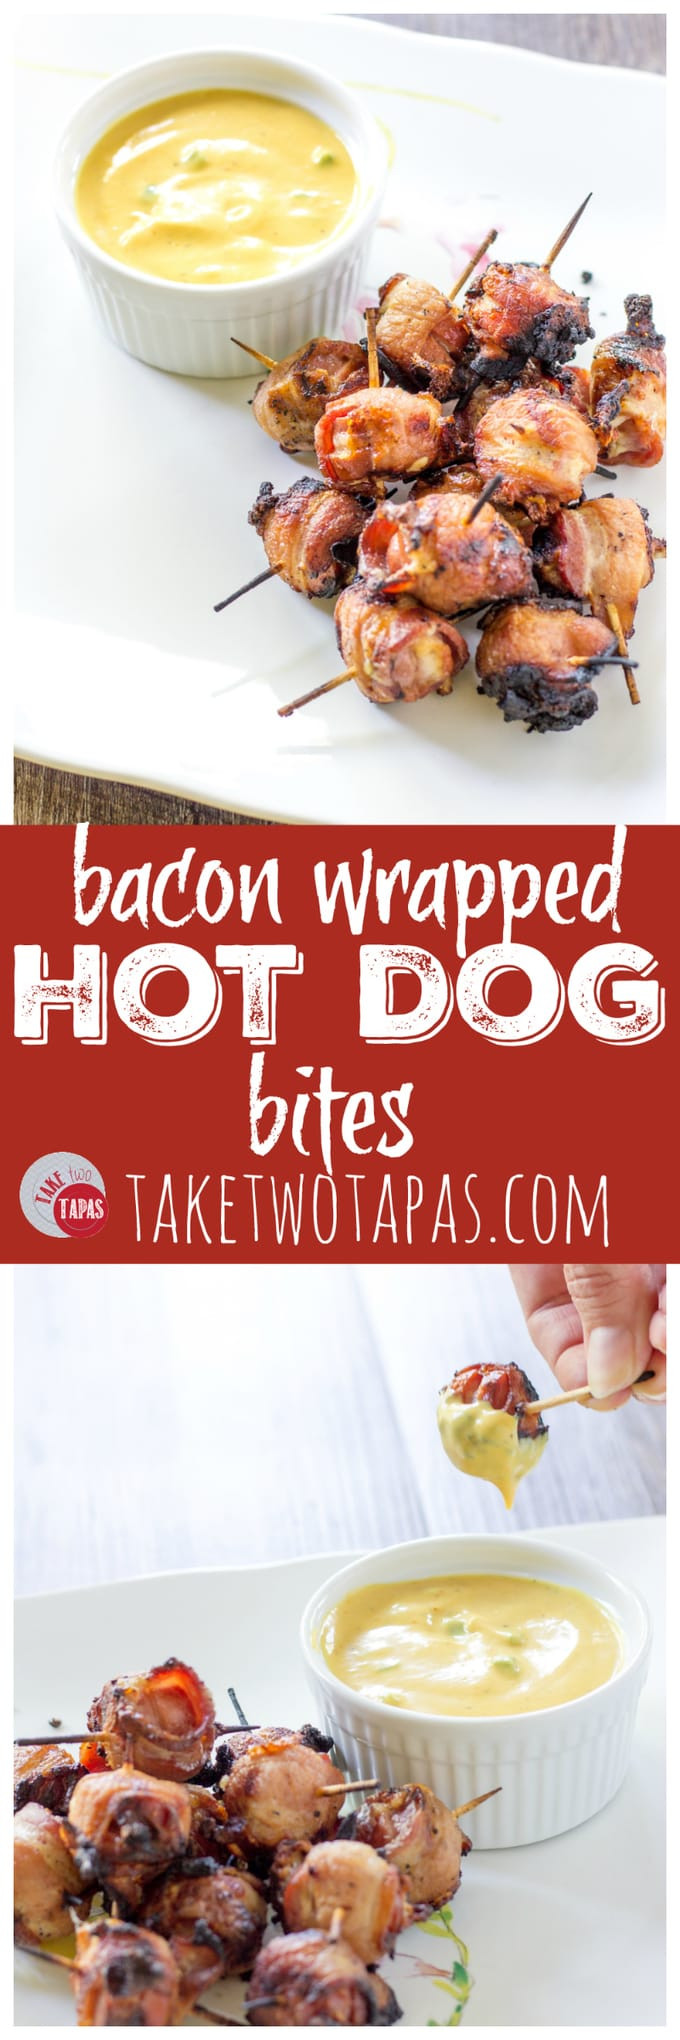 Bacon Wrapped Hot Dog Appetizers
 Hot Dog Bites Bacon Wrapped for Your Summer Get To her